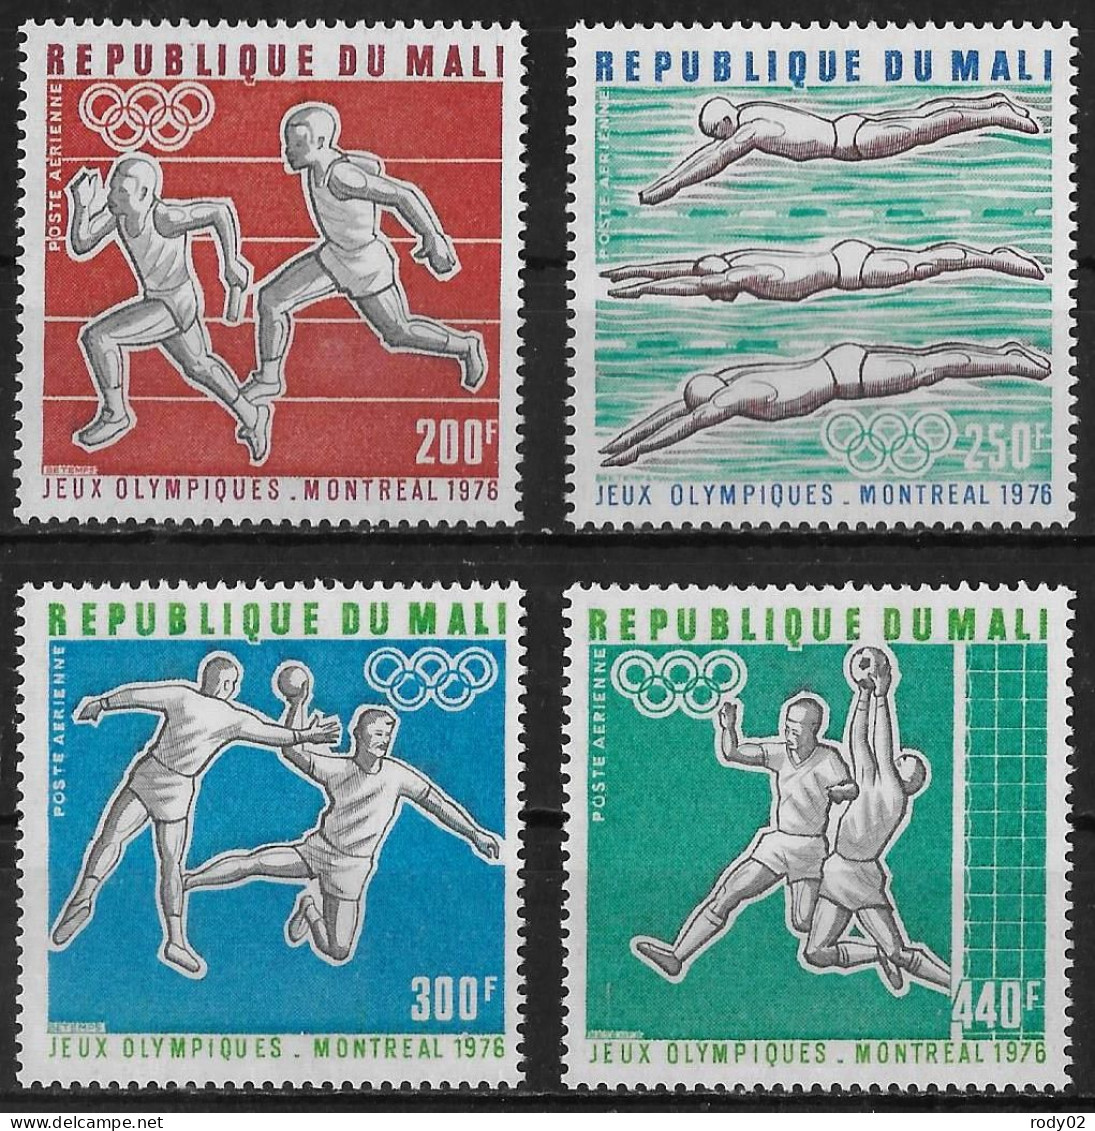 MALI - JEUX OLYMPIQUES DE MONTREAL EN 1976 - PA 276 A 279 - NEUF** MNH - Summer 1976: Montreal